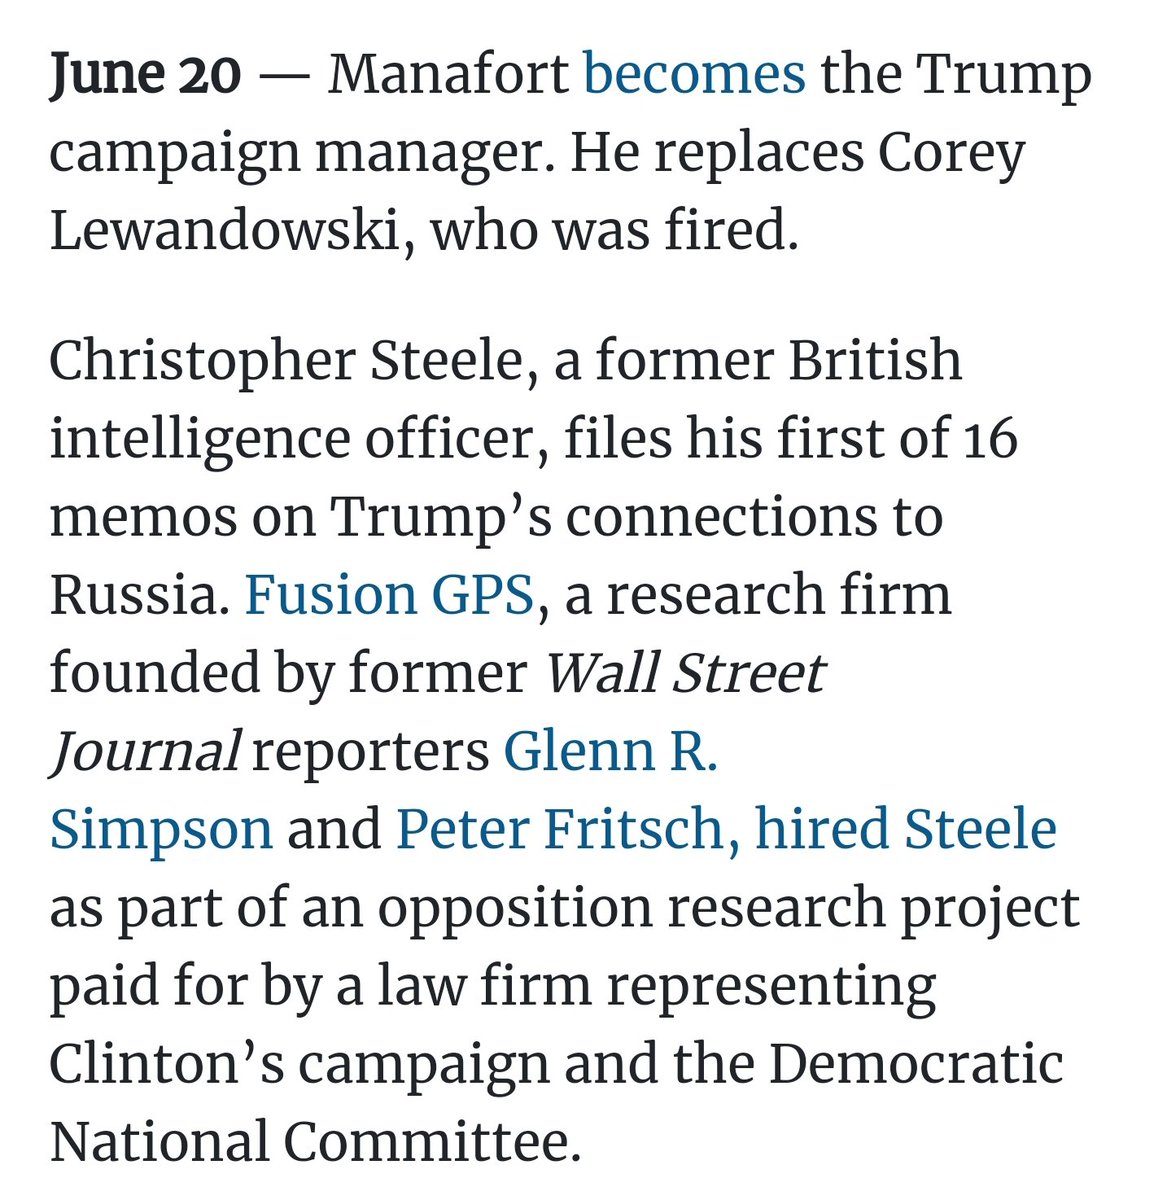 And what was going on in Trumpland?6/3: Trump Jr, re: dirt "i love it, especially later in the summer"6/9: Trump Tower meeting6/14: Trump reacts to news of hack by saying DNC faked it6/20: Steele starts tracking Trump6/24: Yuri/Cohen tweet http://web.archive.org/web/20180111073526/https:/twitter.com/pwnallthethings/status/743208737469509632